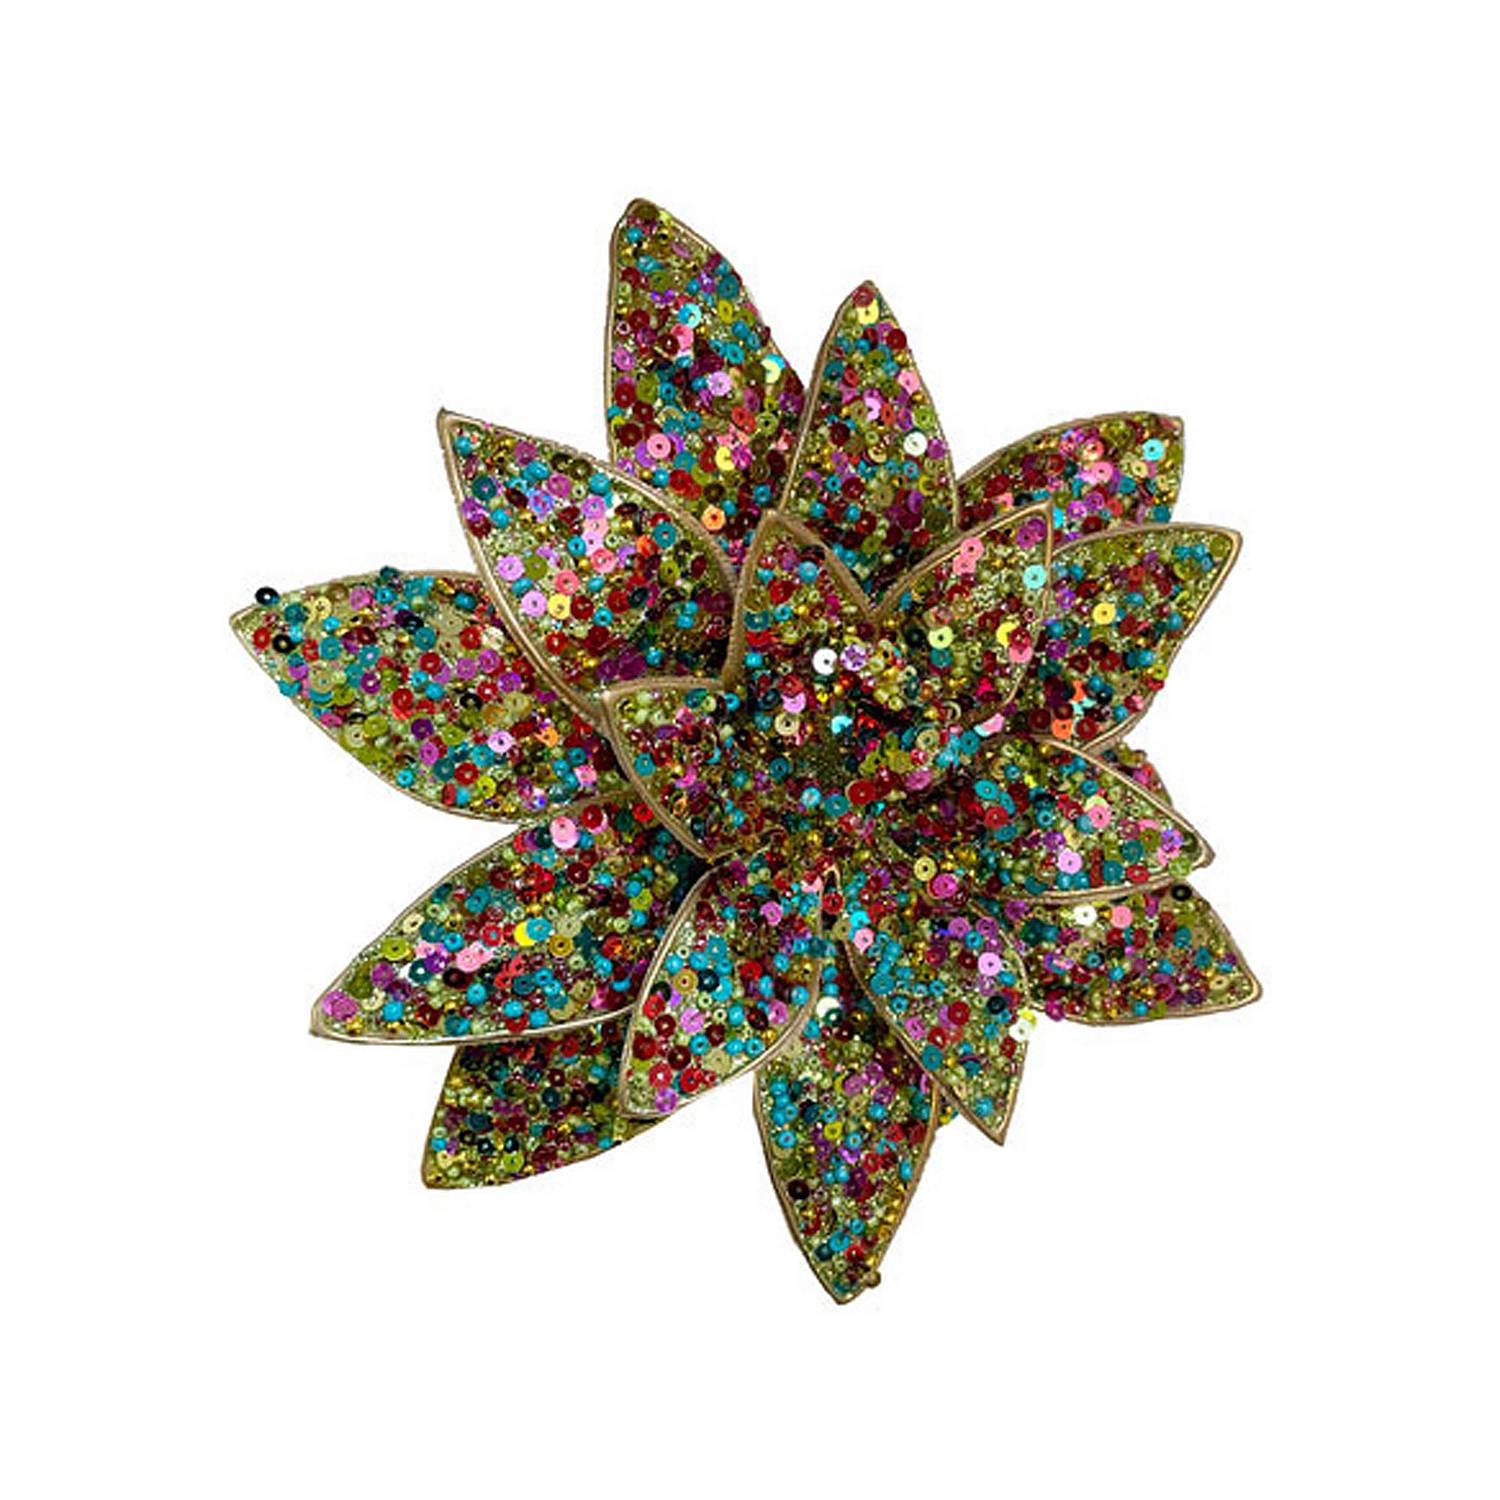 Clip on sequin poinsettia - Multicolour-Nook & Cranny Gift Store-2019 National Gift Store Of The Year-Ireland-Gift Shop